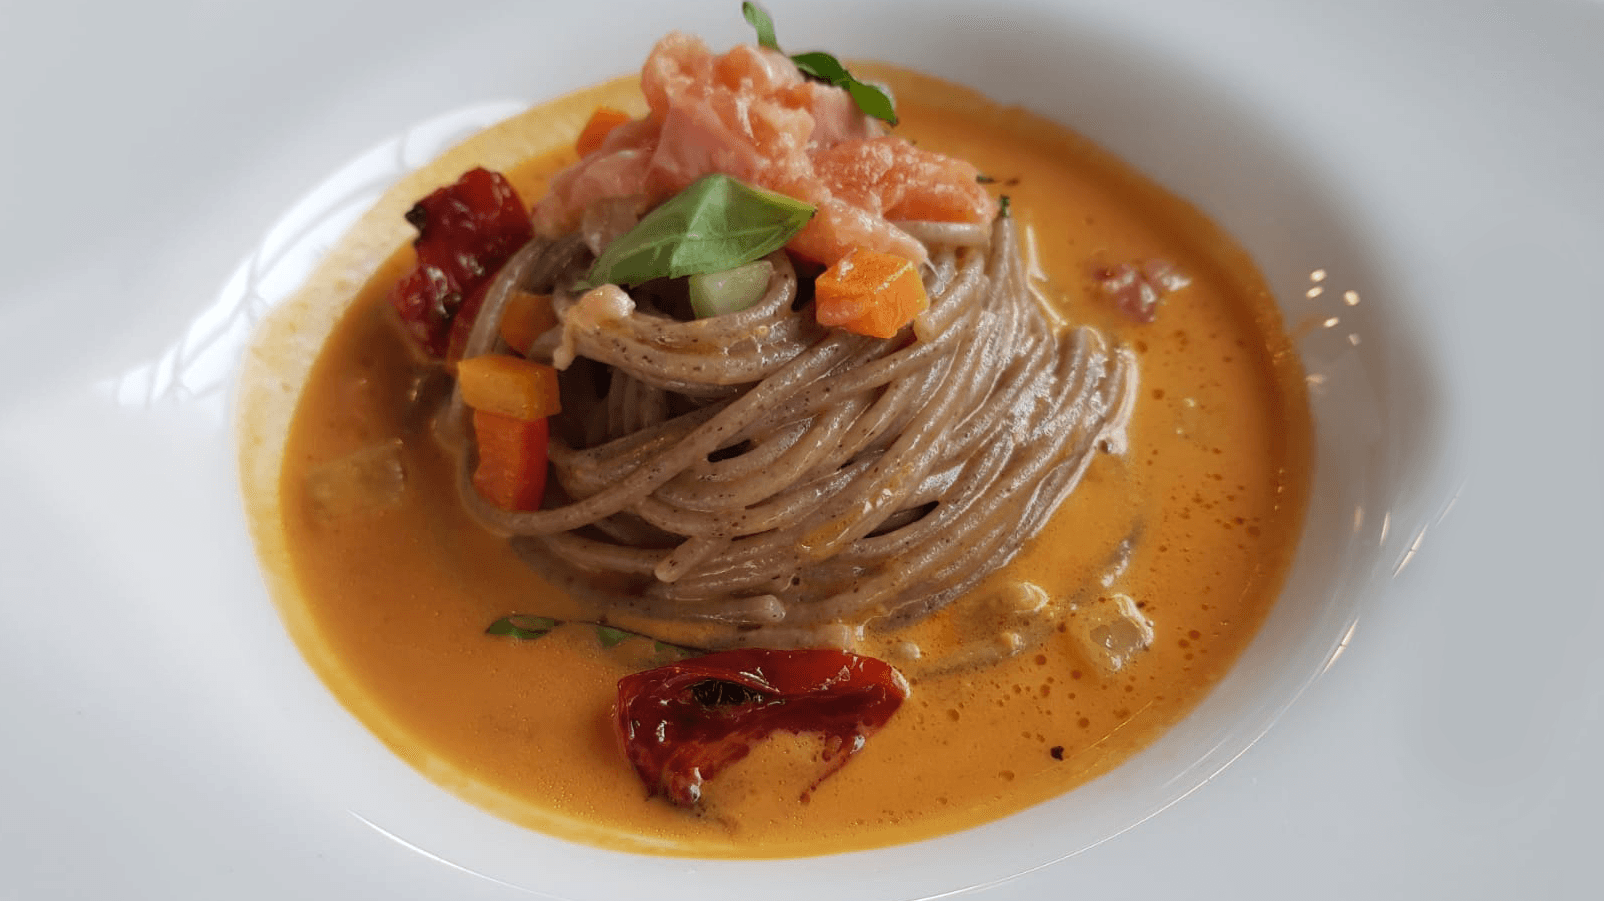 Fidelin del Moro on Tomato Gazpacho, Vegetable Millefeuille, and Salmon Trout